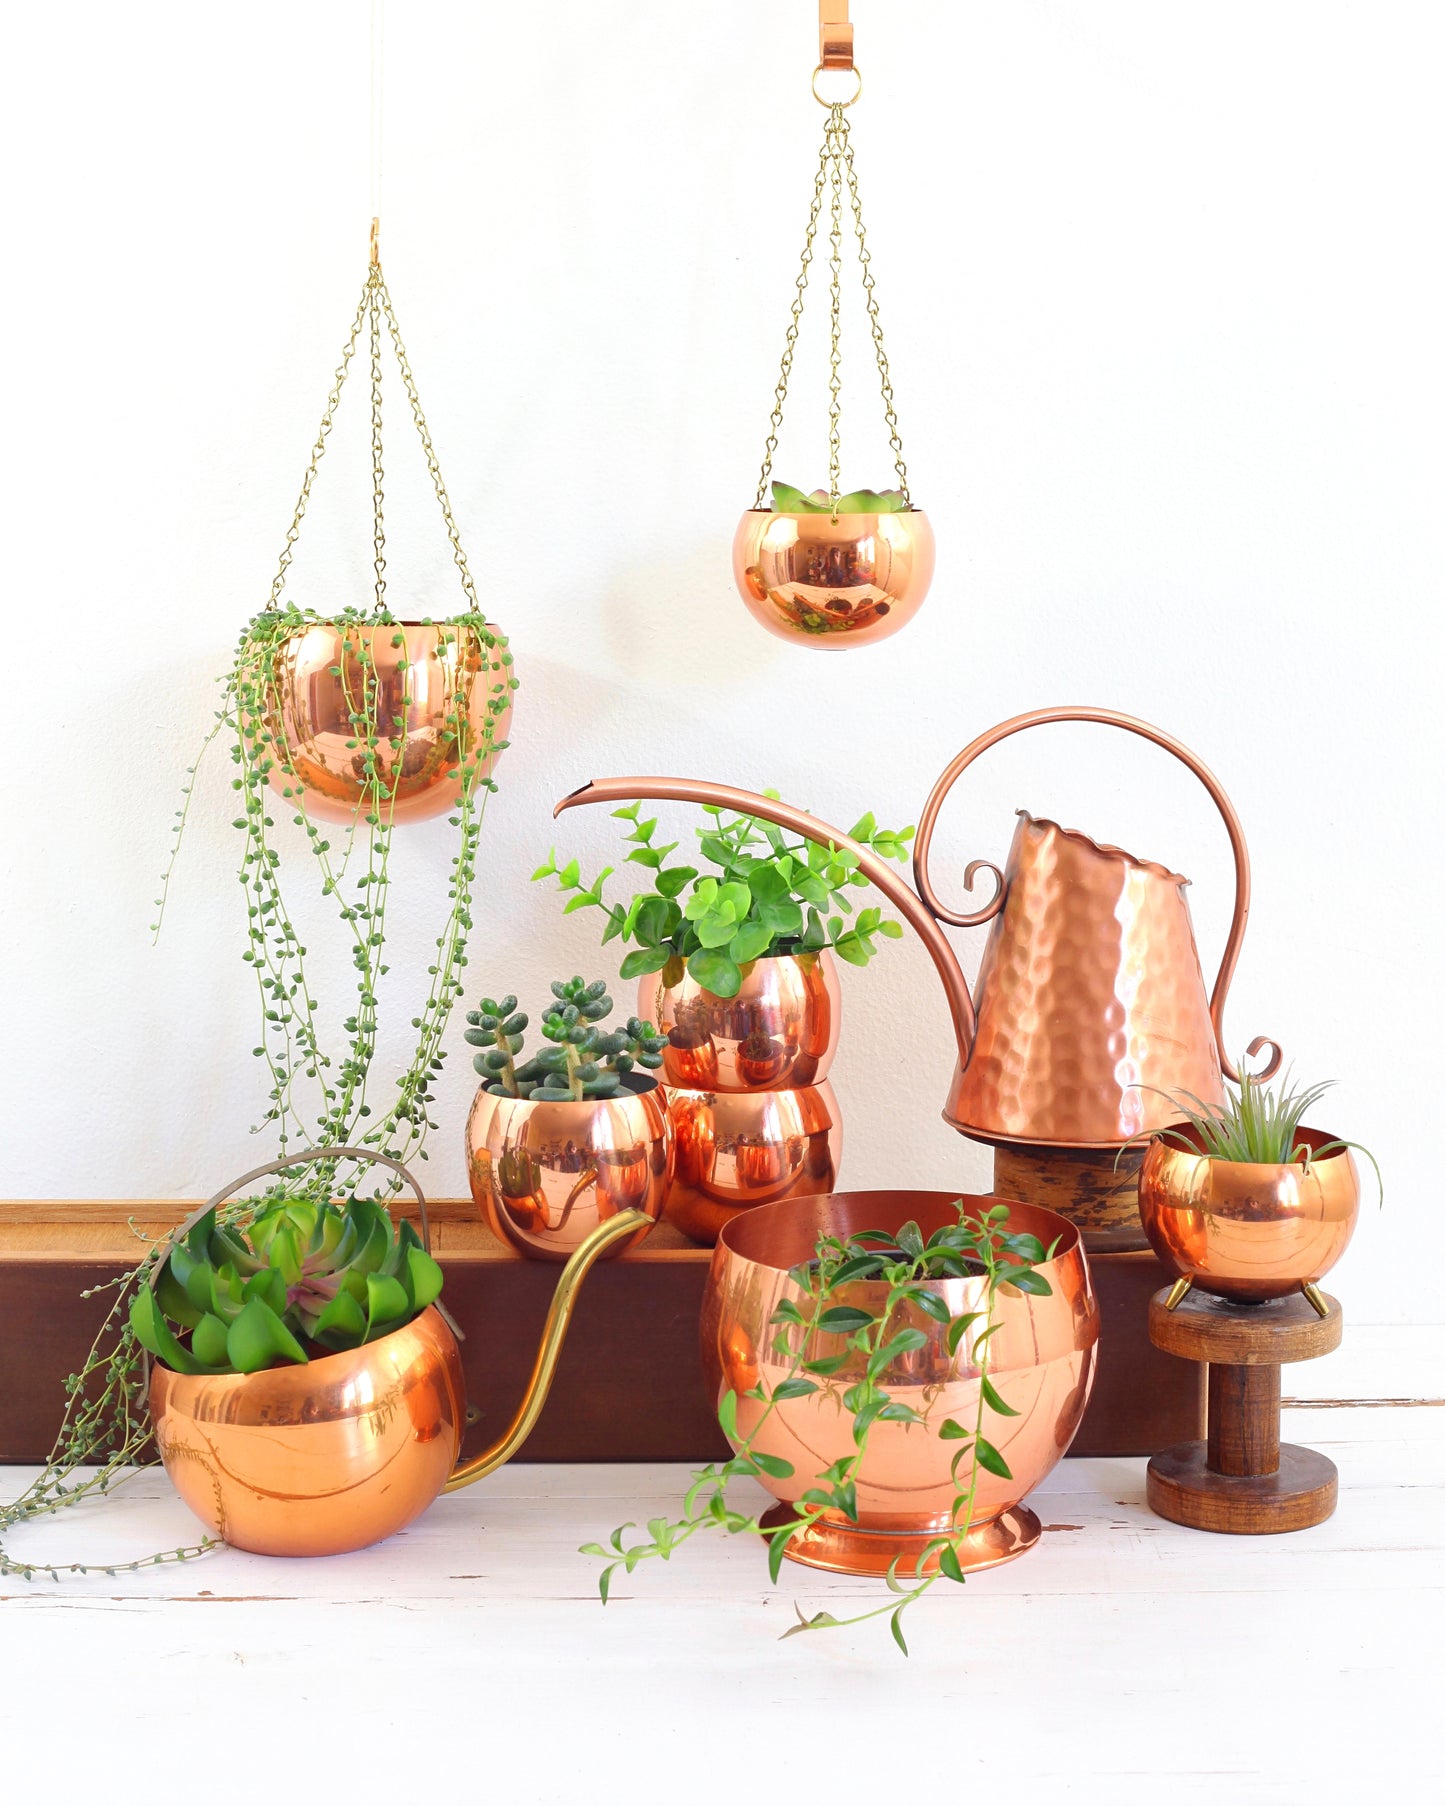 SOLD - Small Hanging Copper Planter by Coppercraft Guild